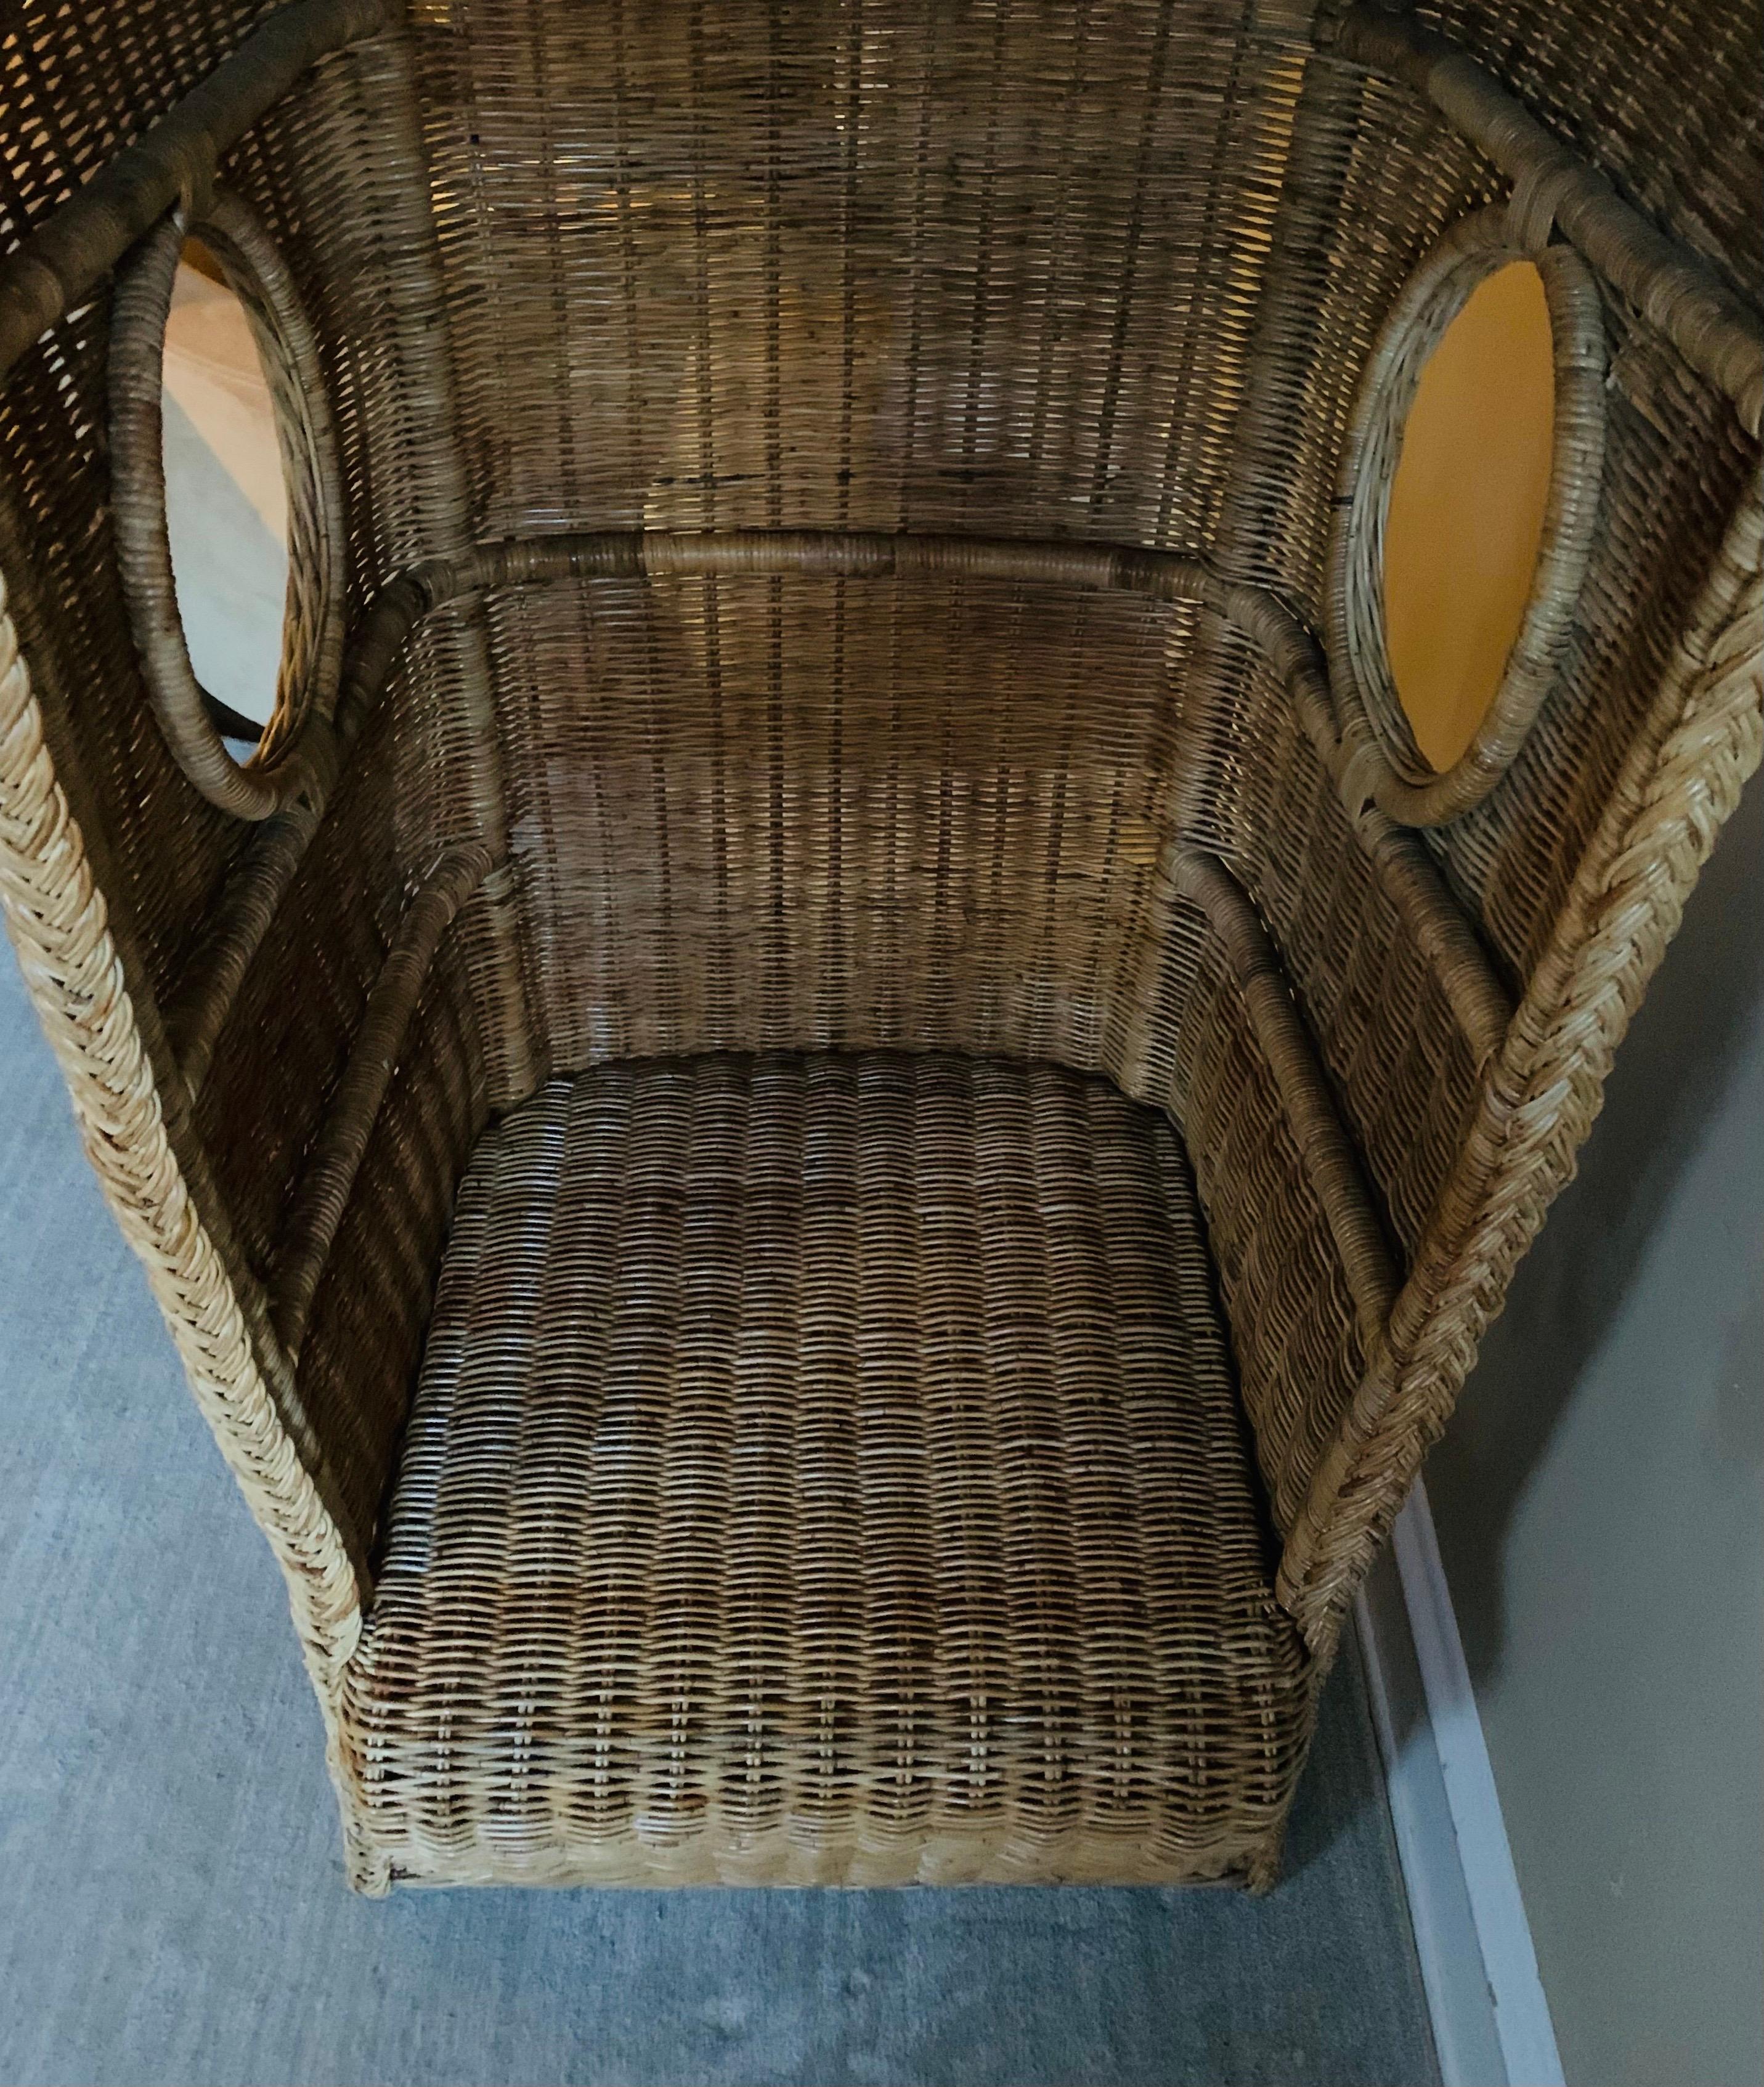 Wonderfully large statement chair with a large canopy hood, replete with port holes.

This piece is in strong complete condition with no holes or issues with the rattan. 

The original natural hue of the rattan remains and is not stained or